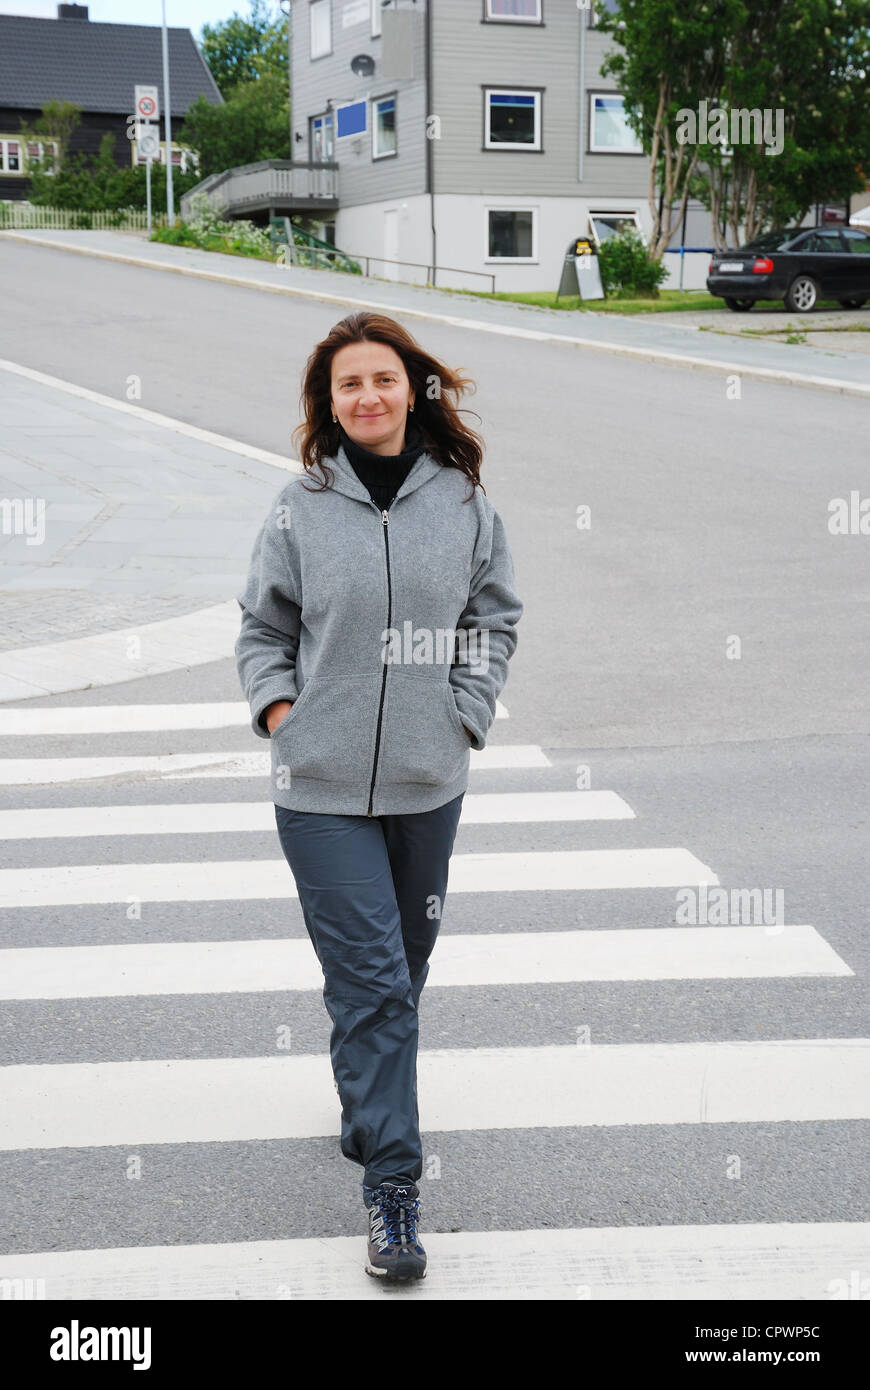 Happy woman on the pedestrian crossing Stock Photo